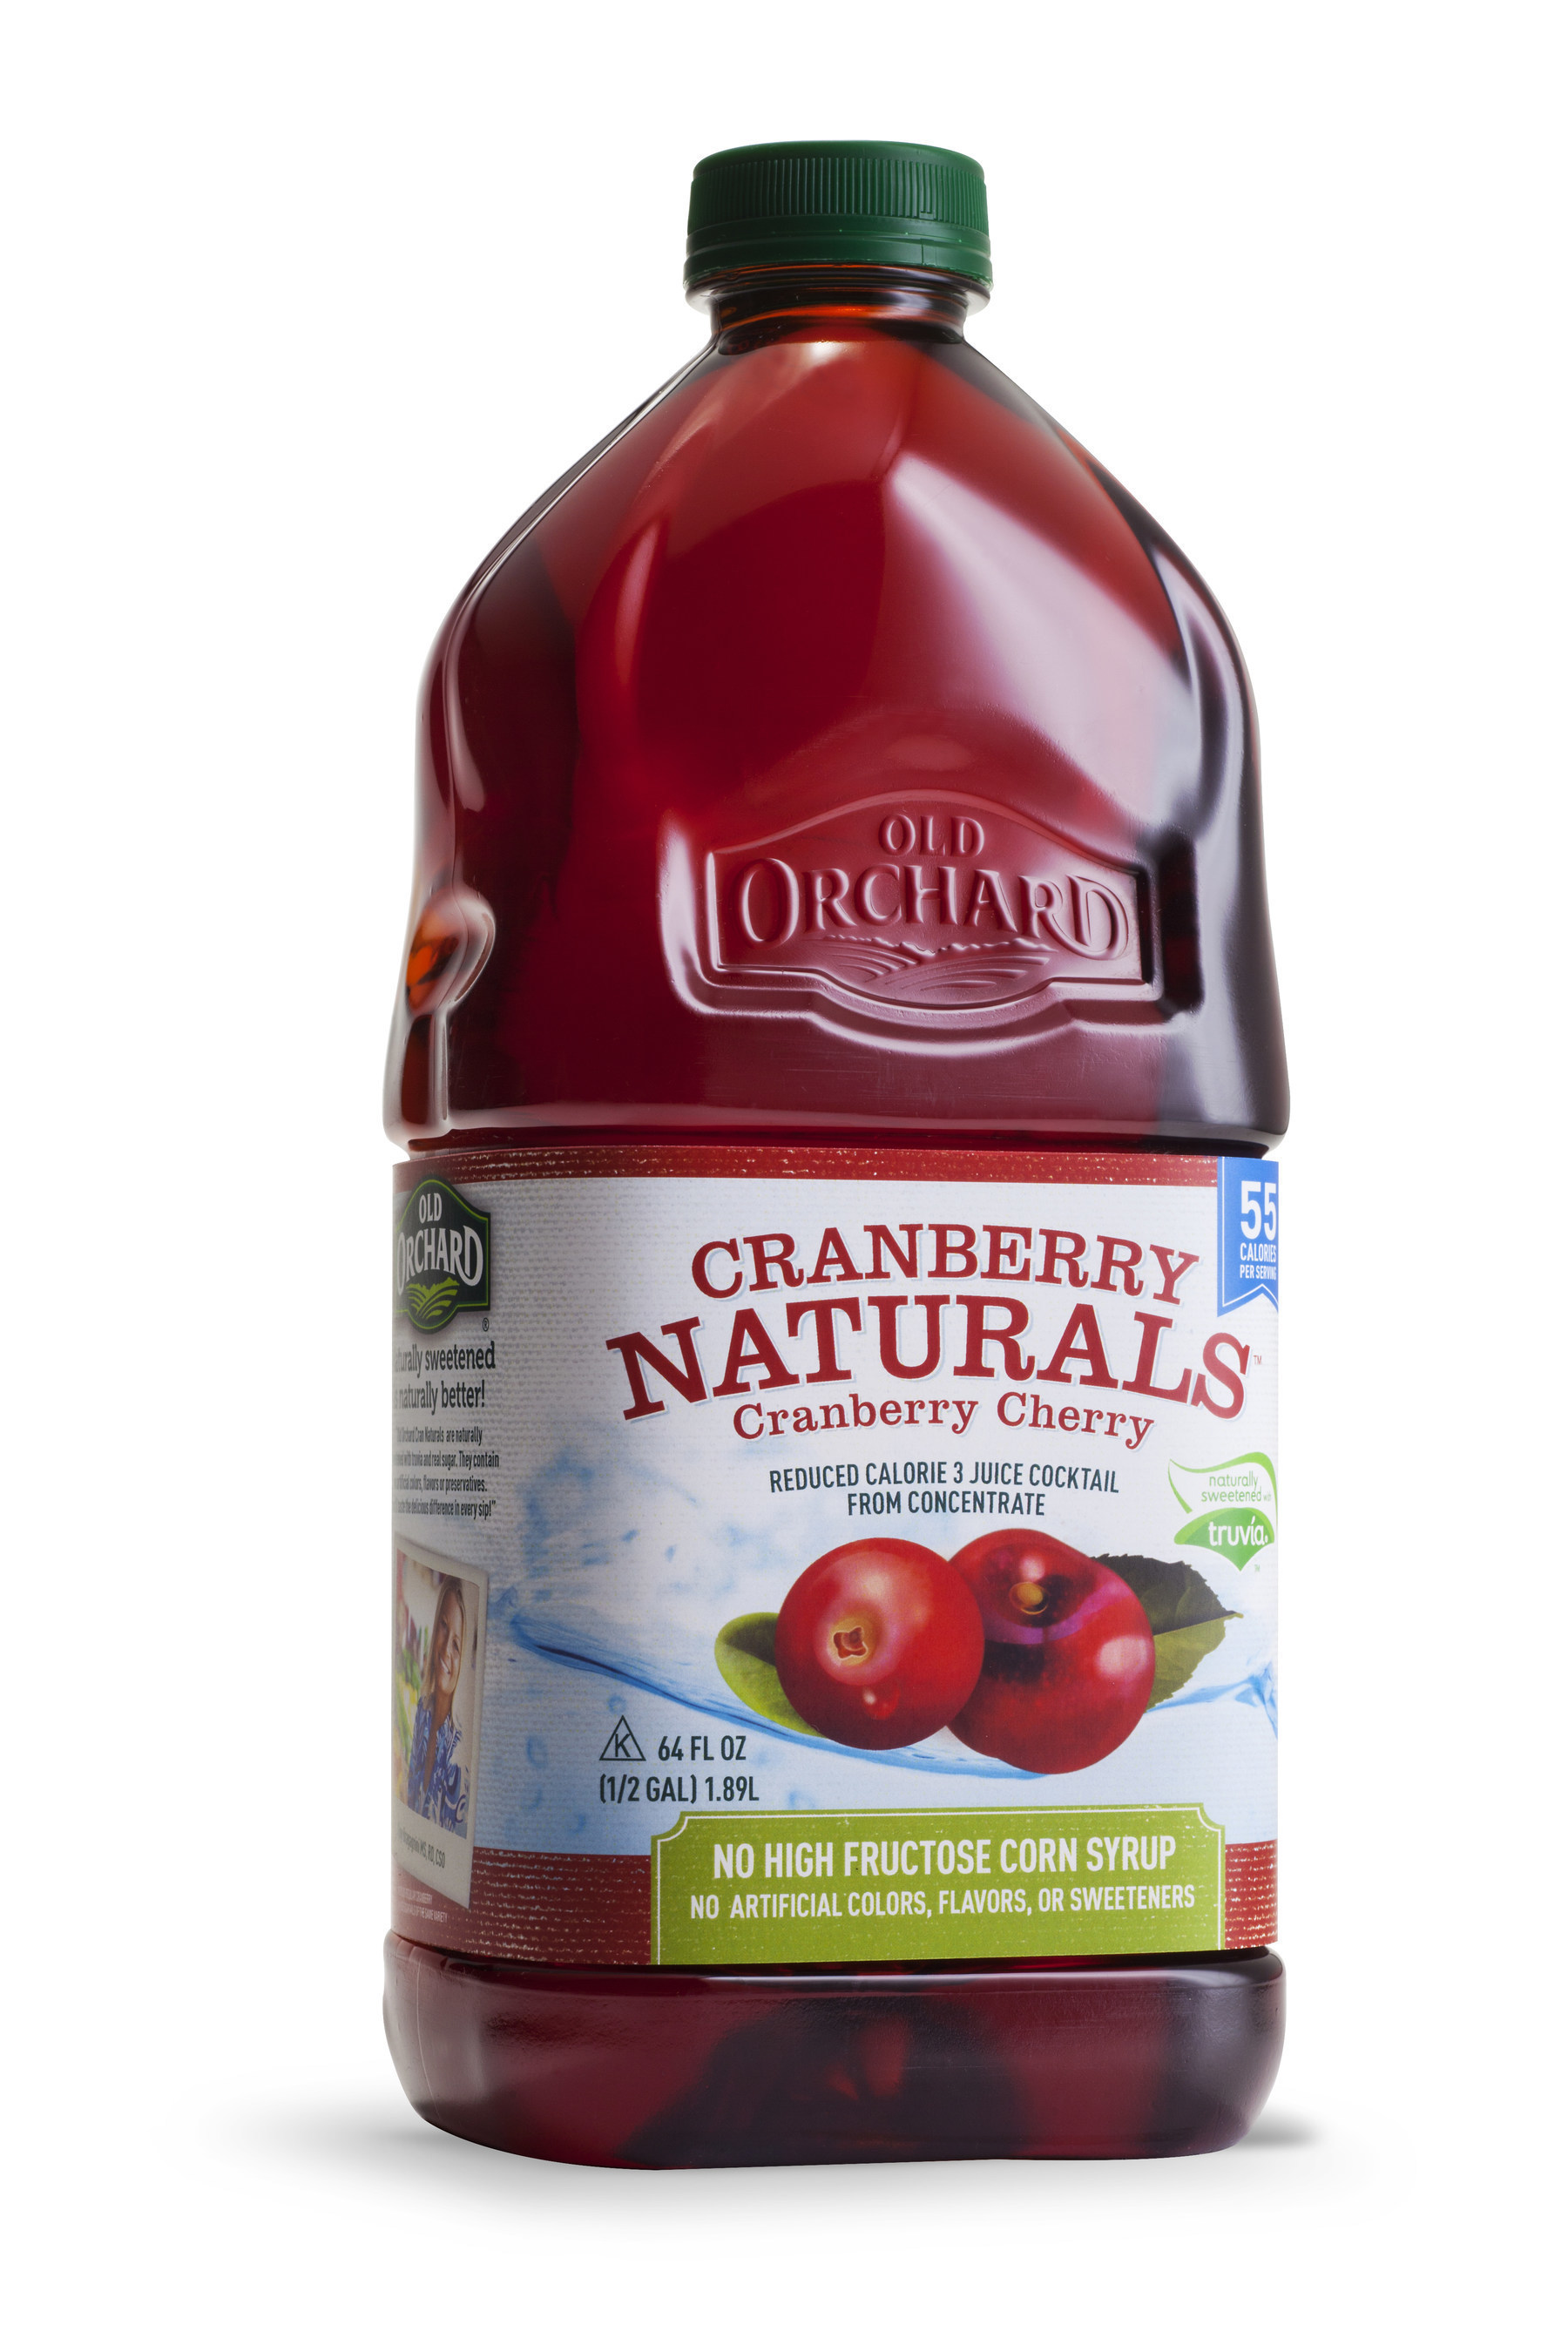 Old Orchard Brands Expands its Cran Naturals Line to Offer Six Varieties, Including New Cranberry Cherry